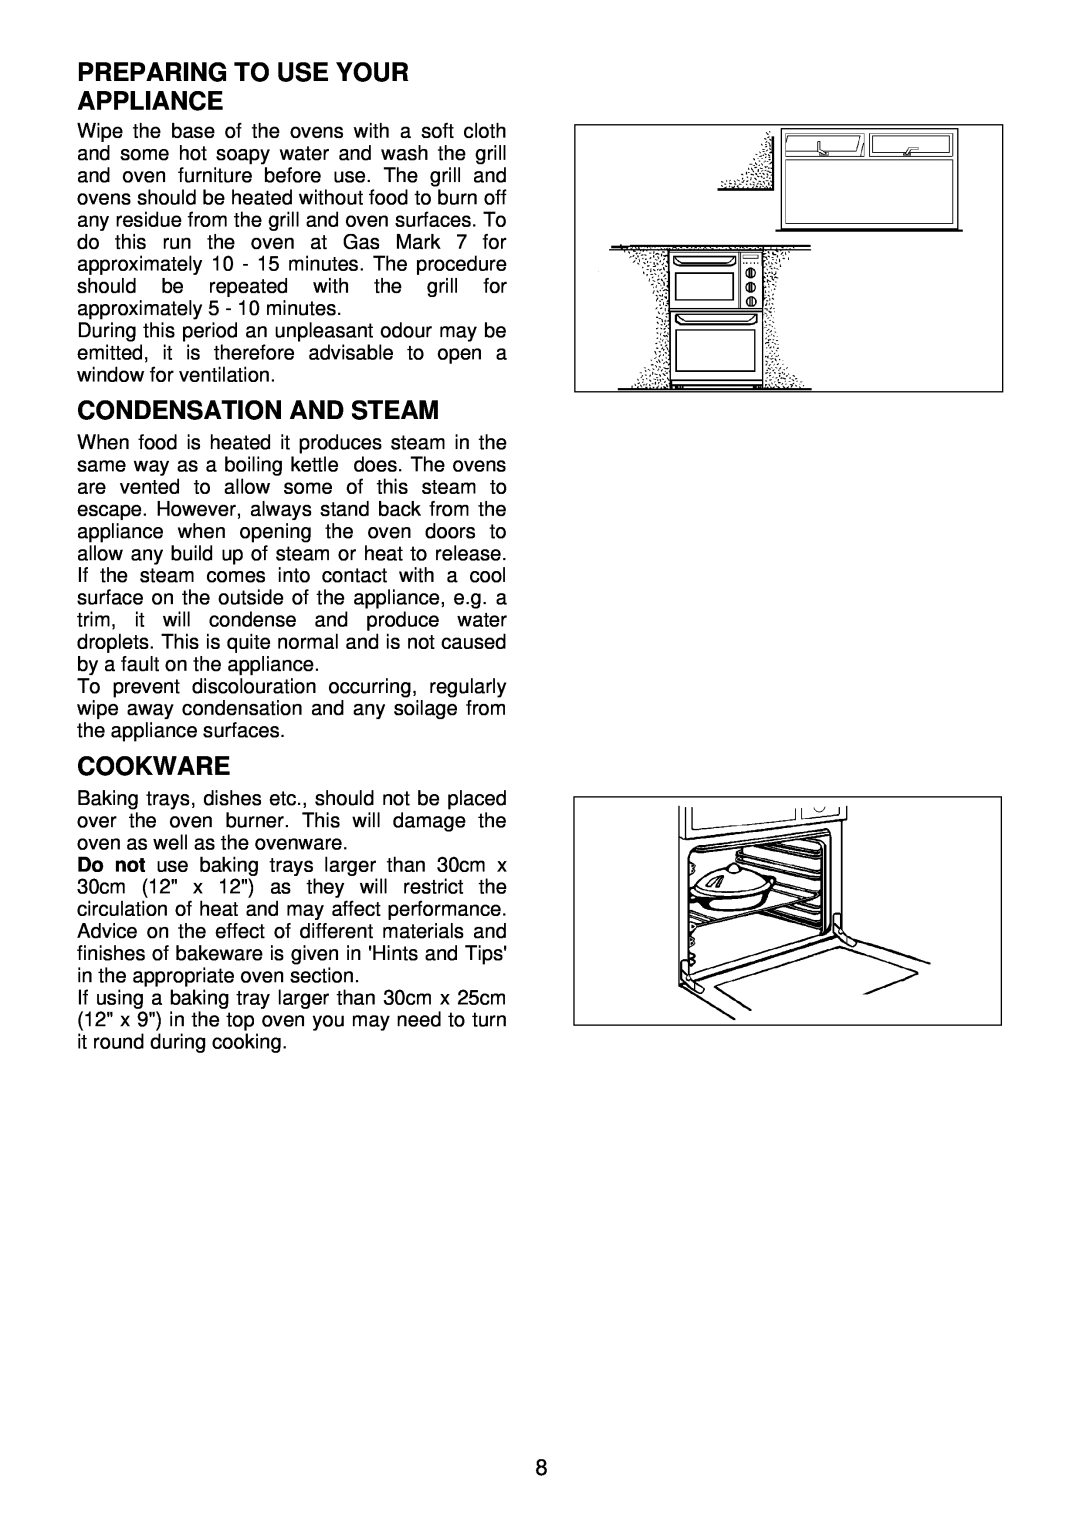 Electrolux EDB 876 manual Preparing To Use Your Appliance, Condensation And Steam, Cookware 